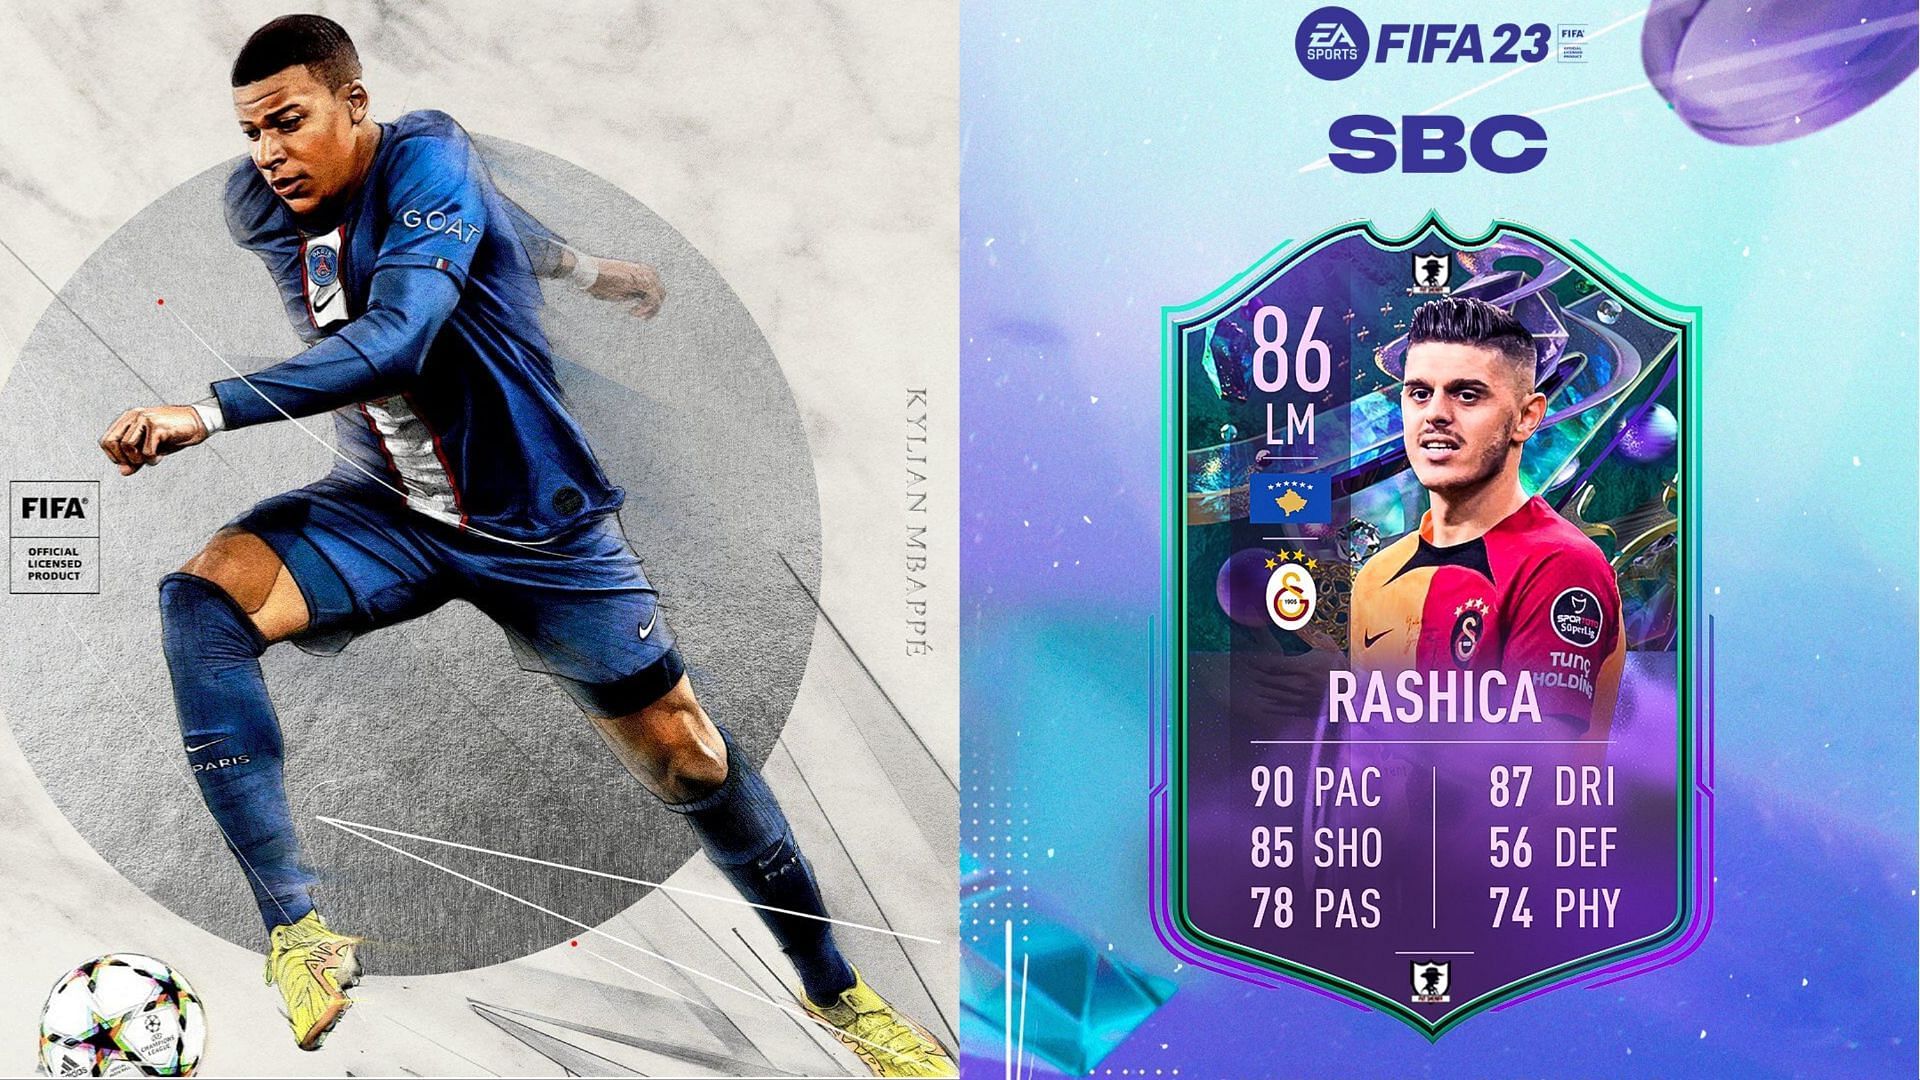 FIFA 23 players could find an affordable solution when the Milot Rashica Fantasy FUT SBC (Images via EA Spots, Twitter/FUT Sheriff)